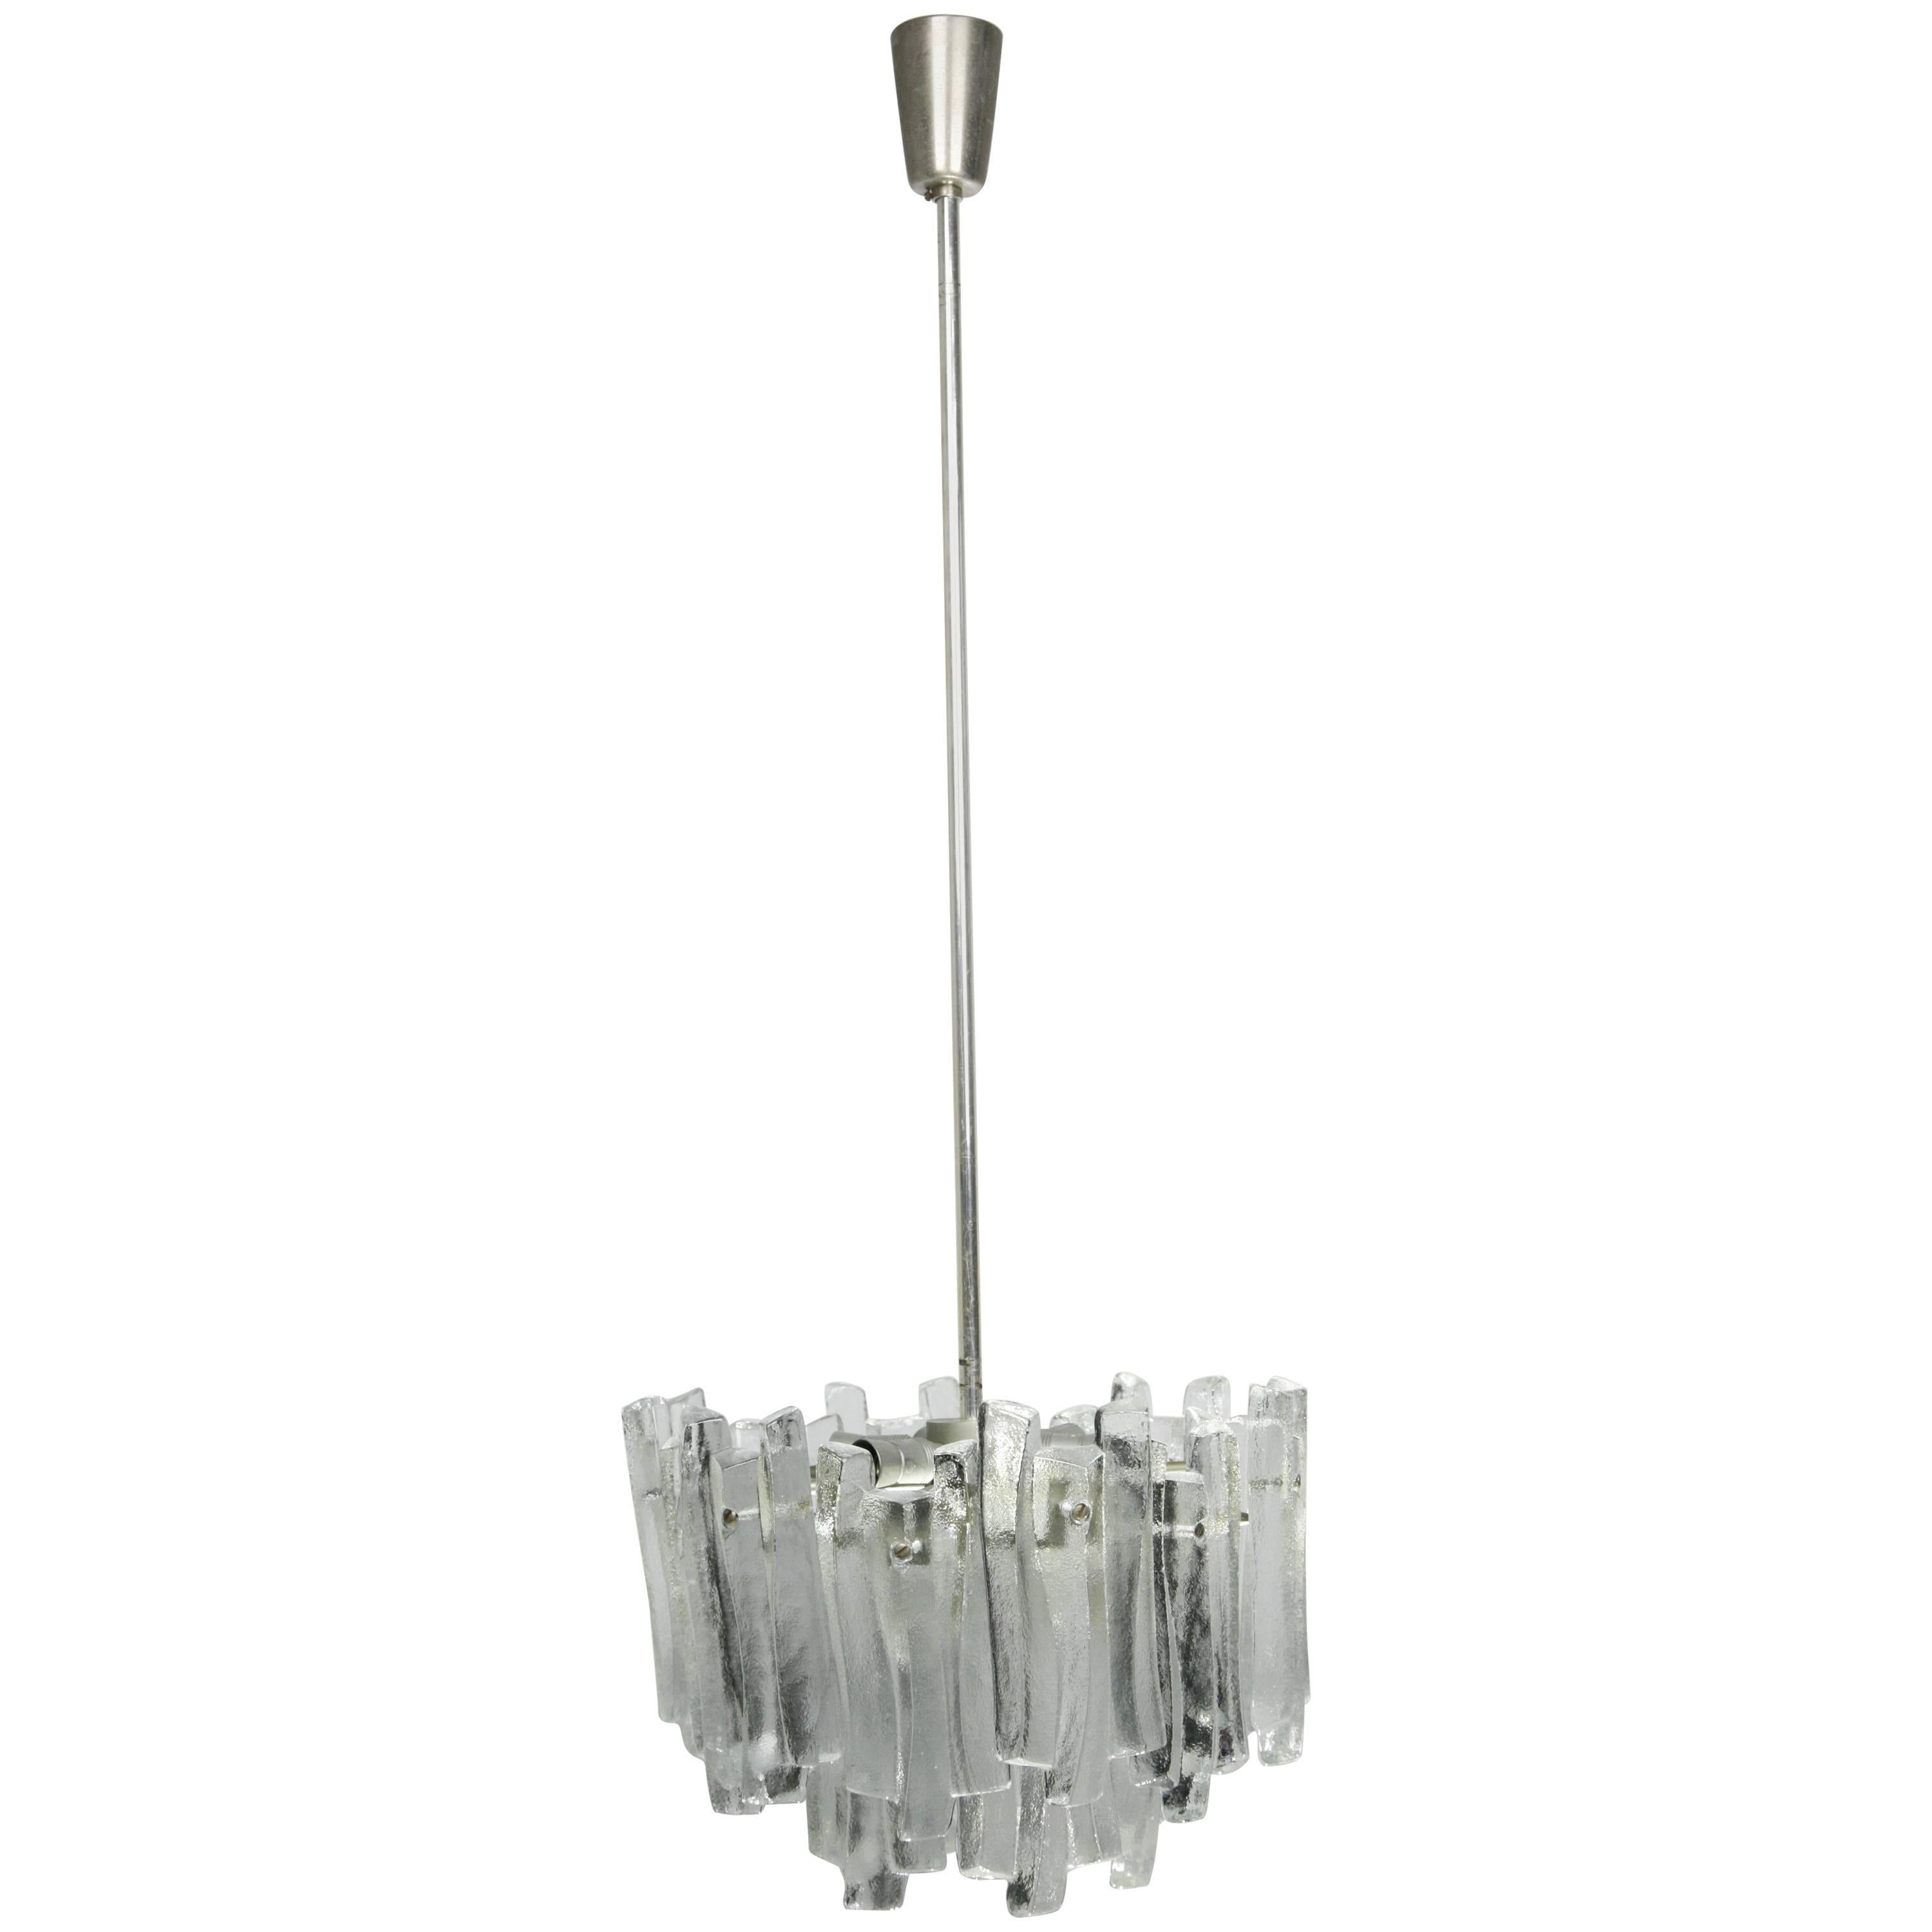 Ice glass chandelier, 1960, Kalmar, Austria
Metal frame holding 18 pieces of thick ice looking glass with a matte organically shape spread out on two rows, the inside of the glass is clear and flat, there is seven original European light sources